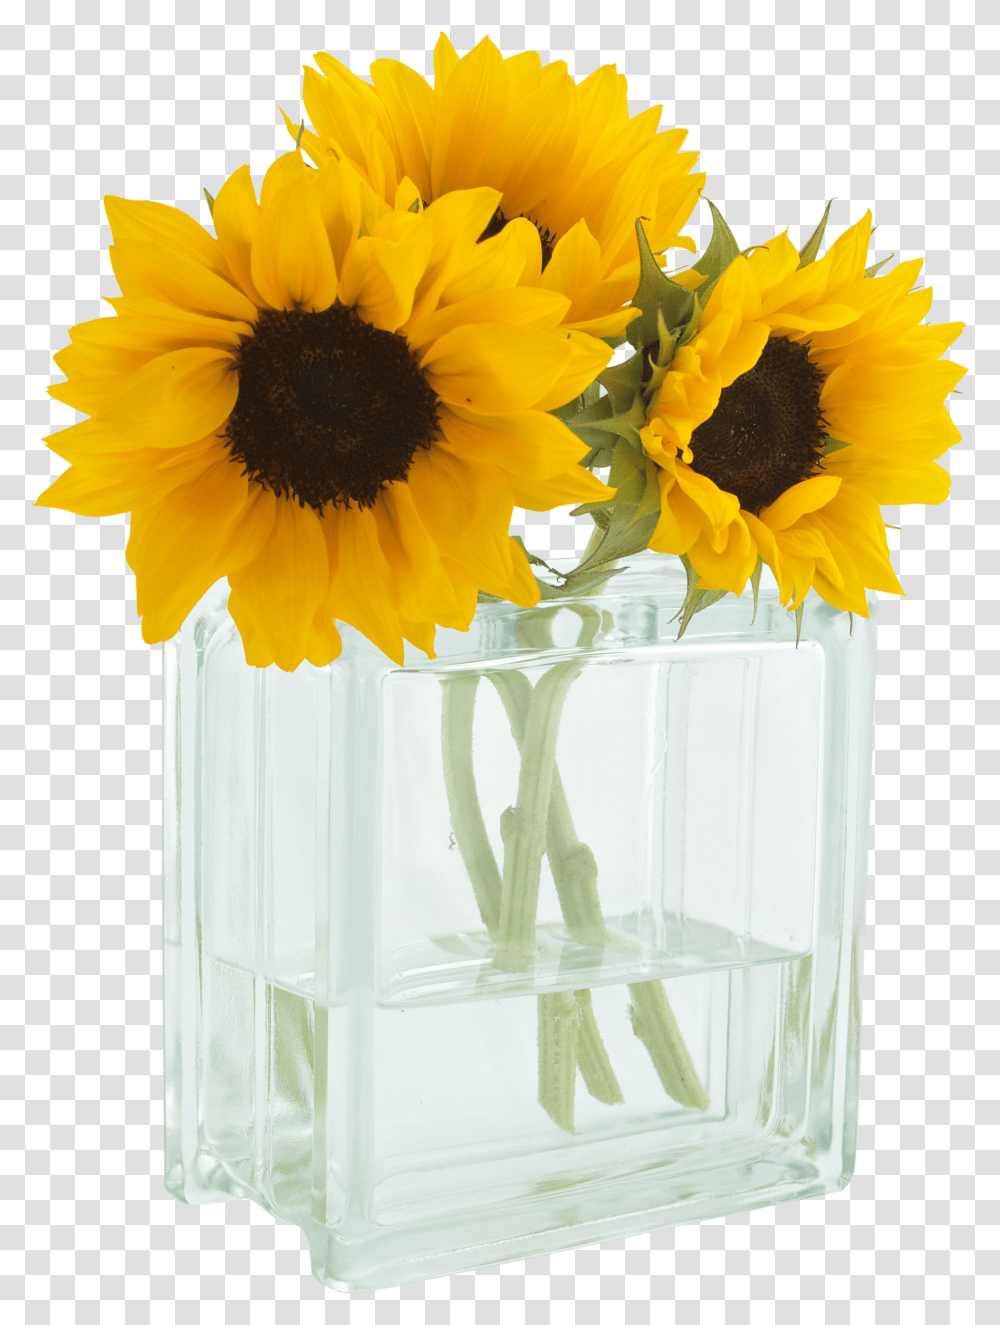 You Are My Sunshine 3 Sunflowers In A Vase Transparent Png